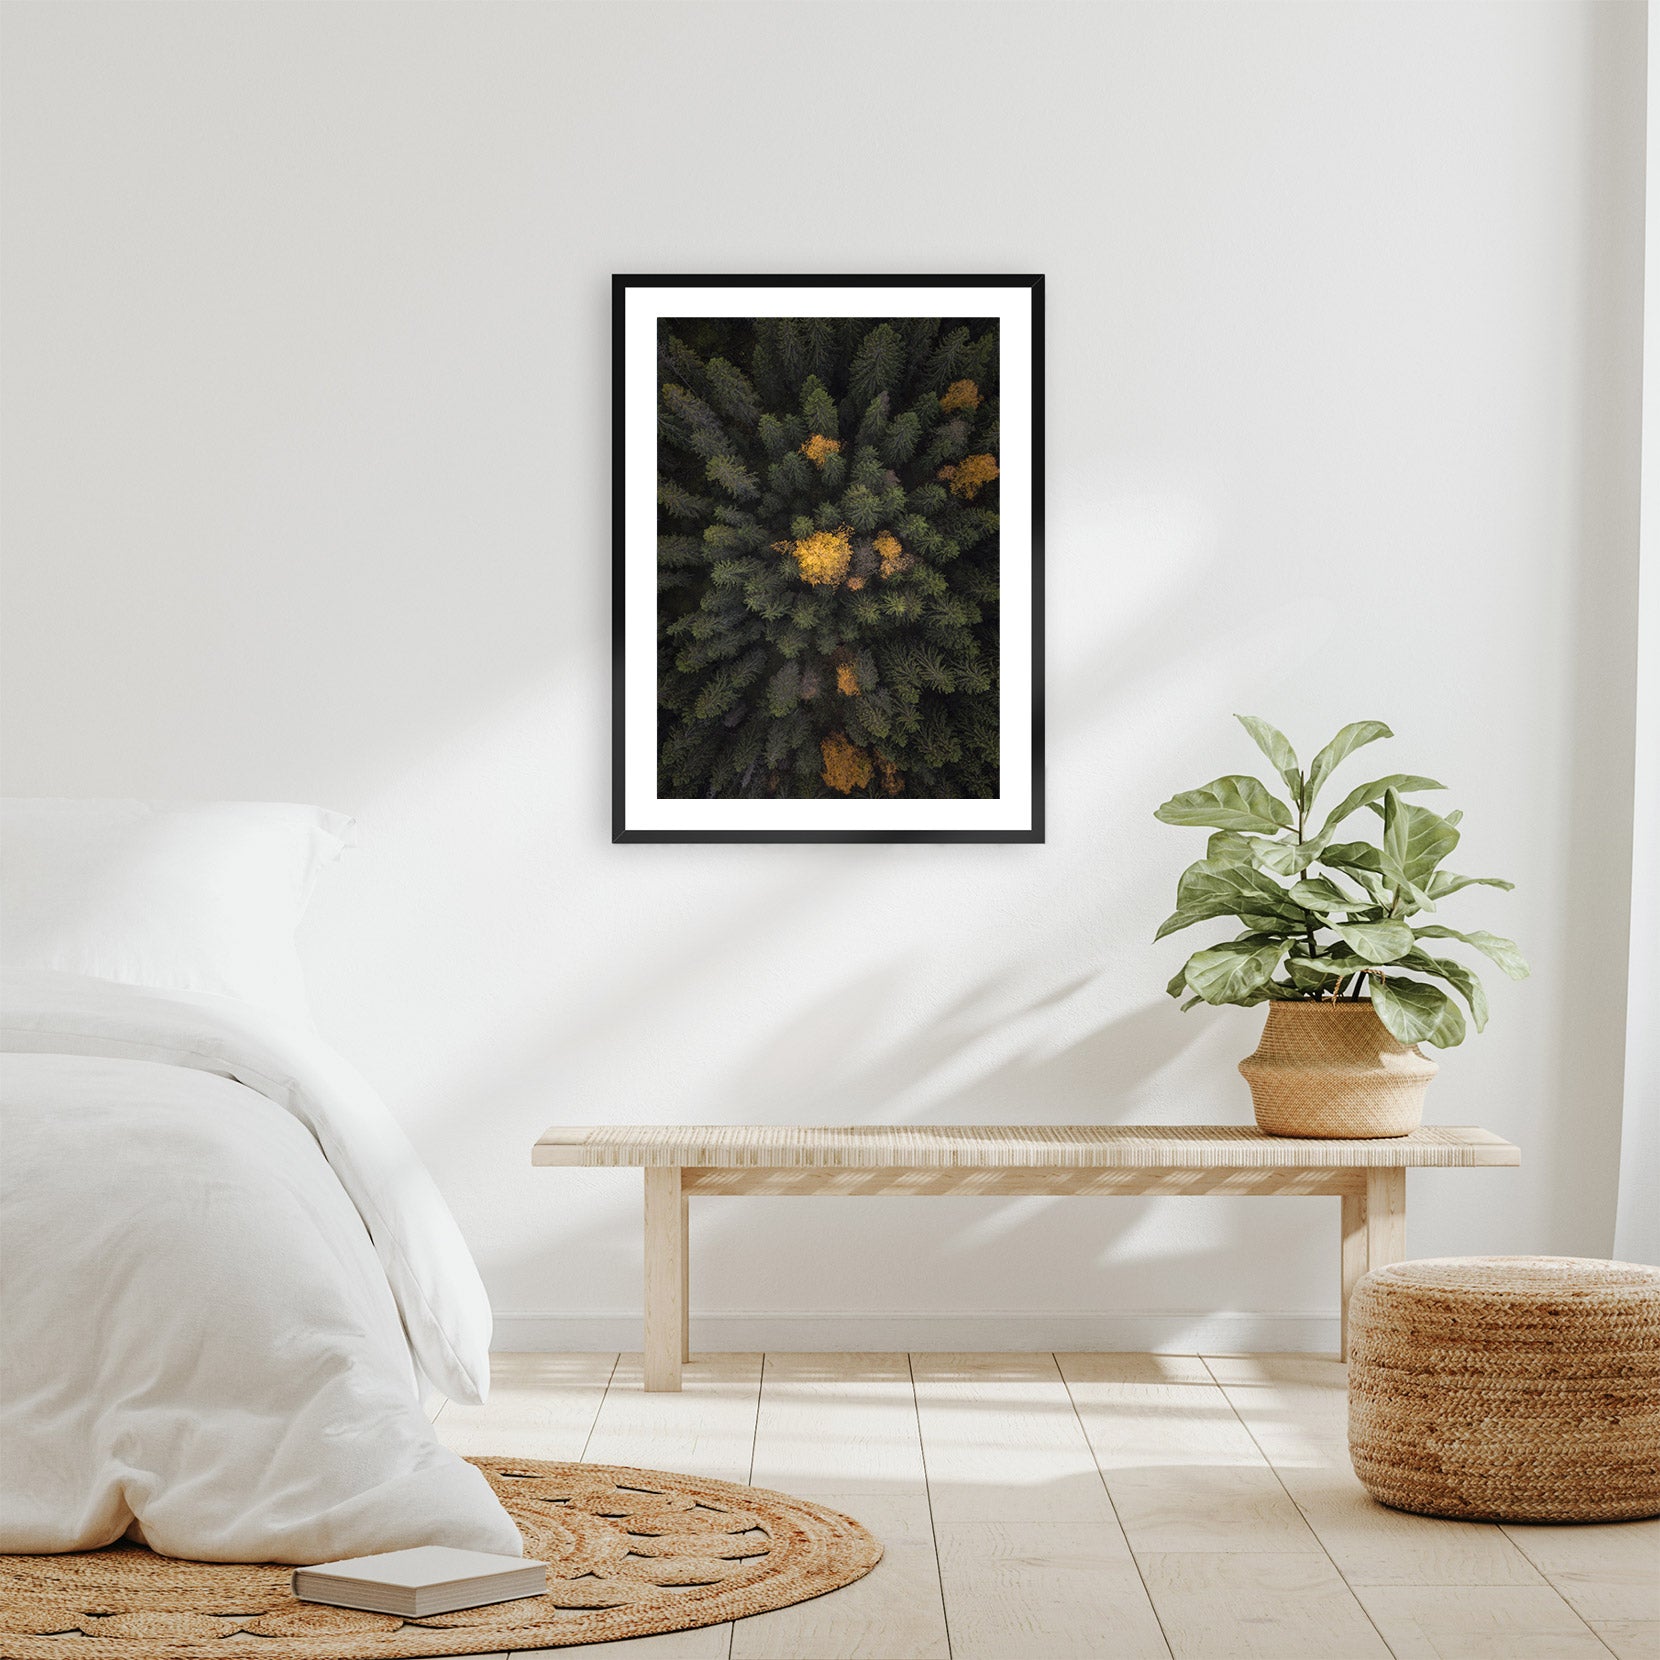 A framed print of a forest from above